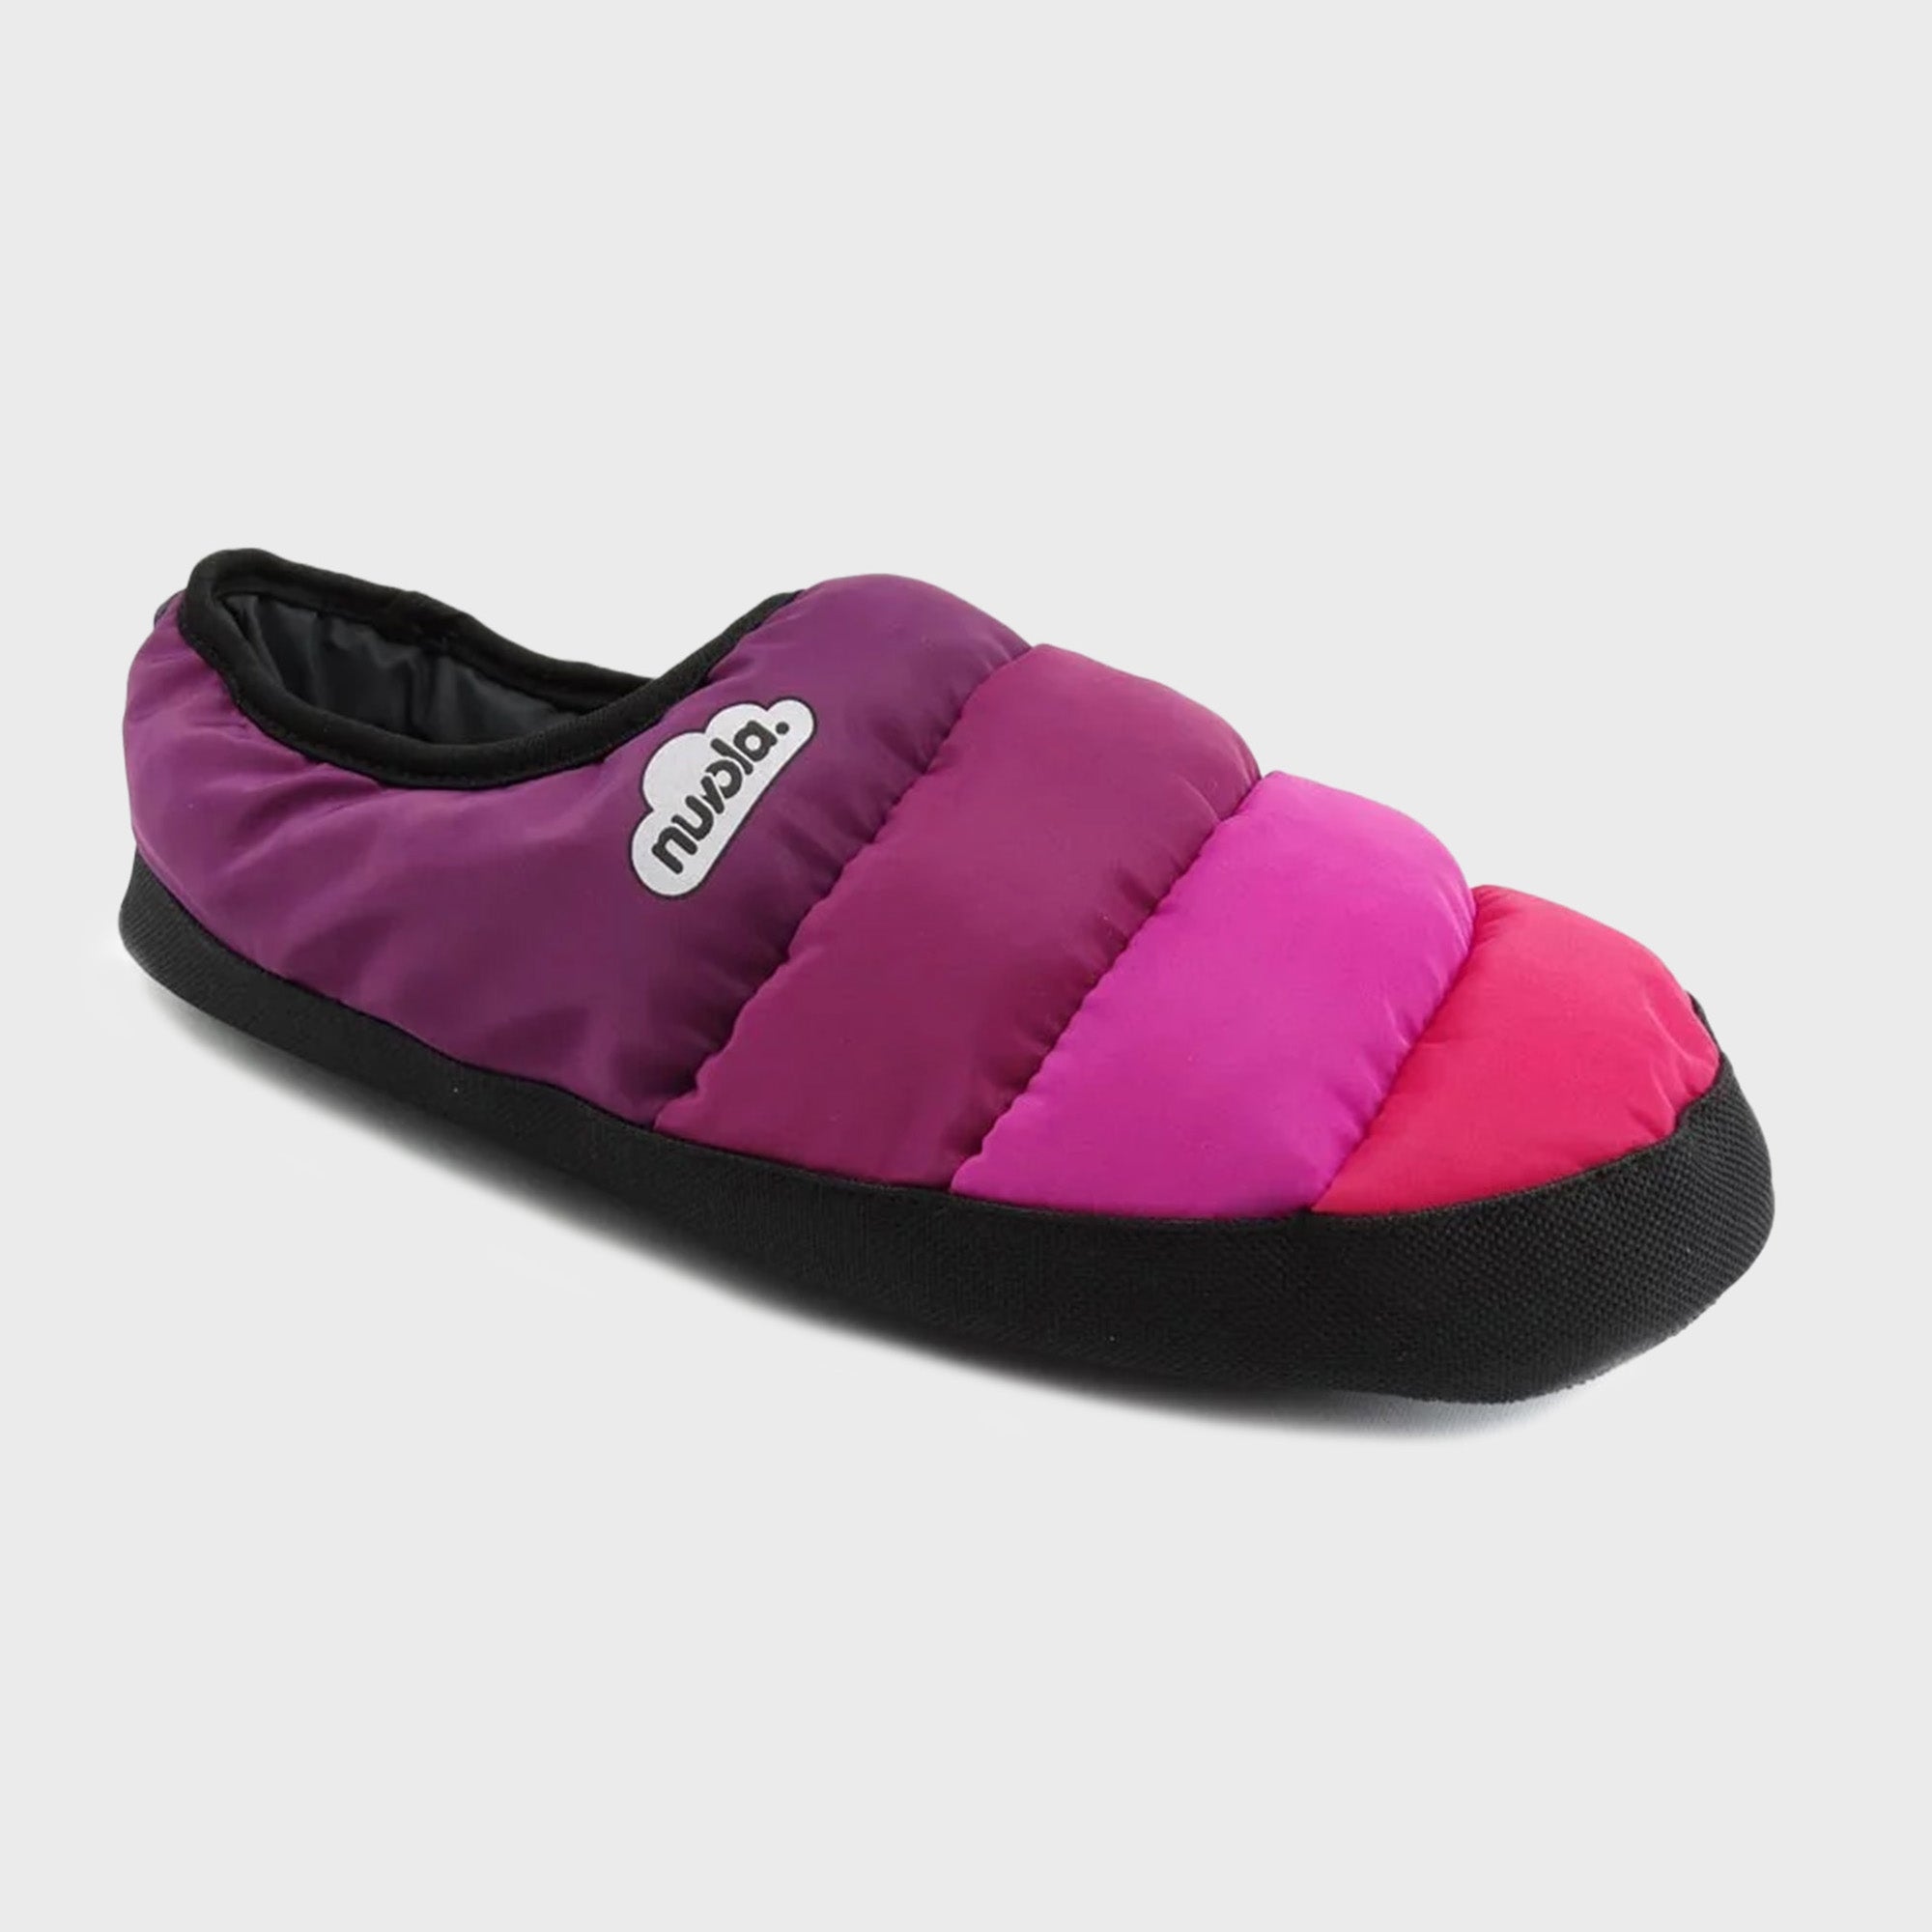 Nuvola Classic Colors Slippers in Fuchsia CNCLACLRS25 FROM EIGHTYWINGOLD - OFFICIAL BRAND PARTNER